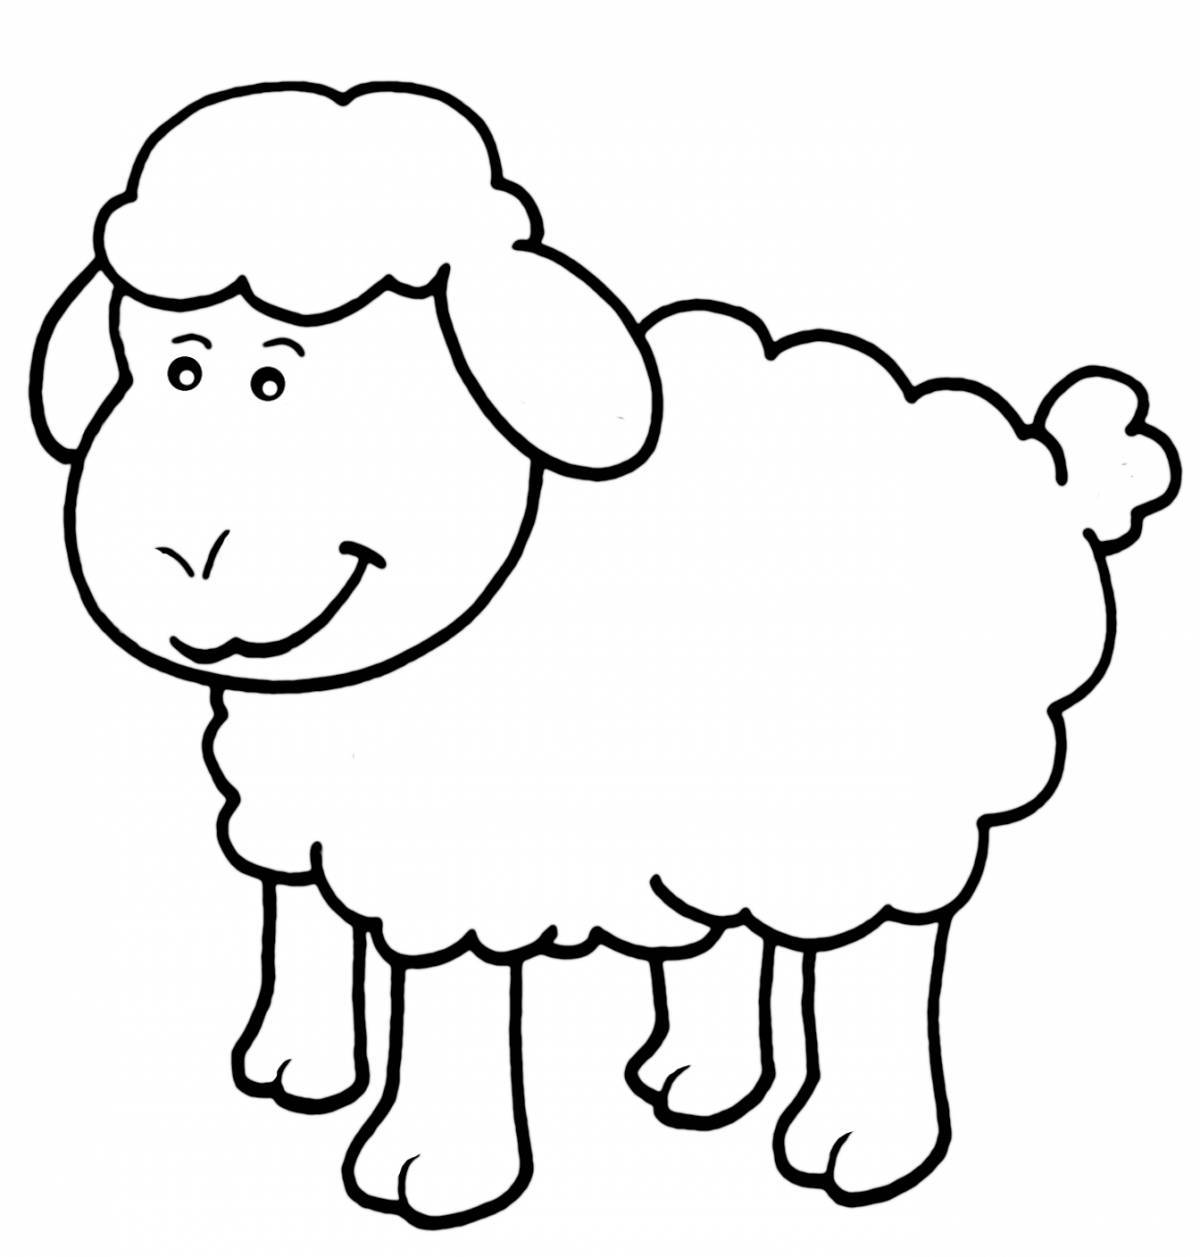 Colorful sheep coloring page for kids